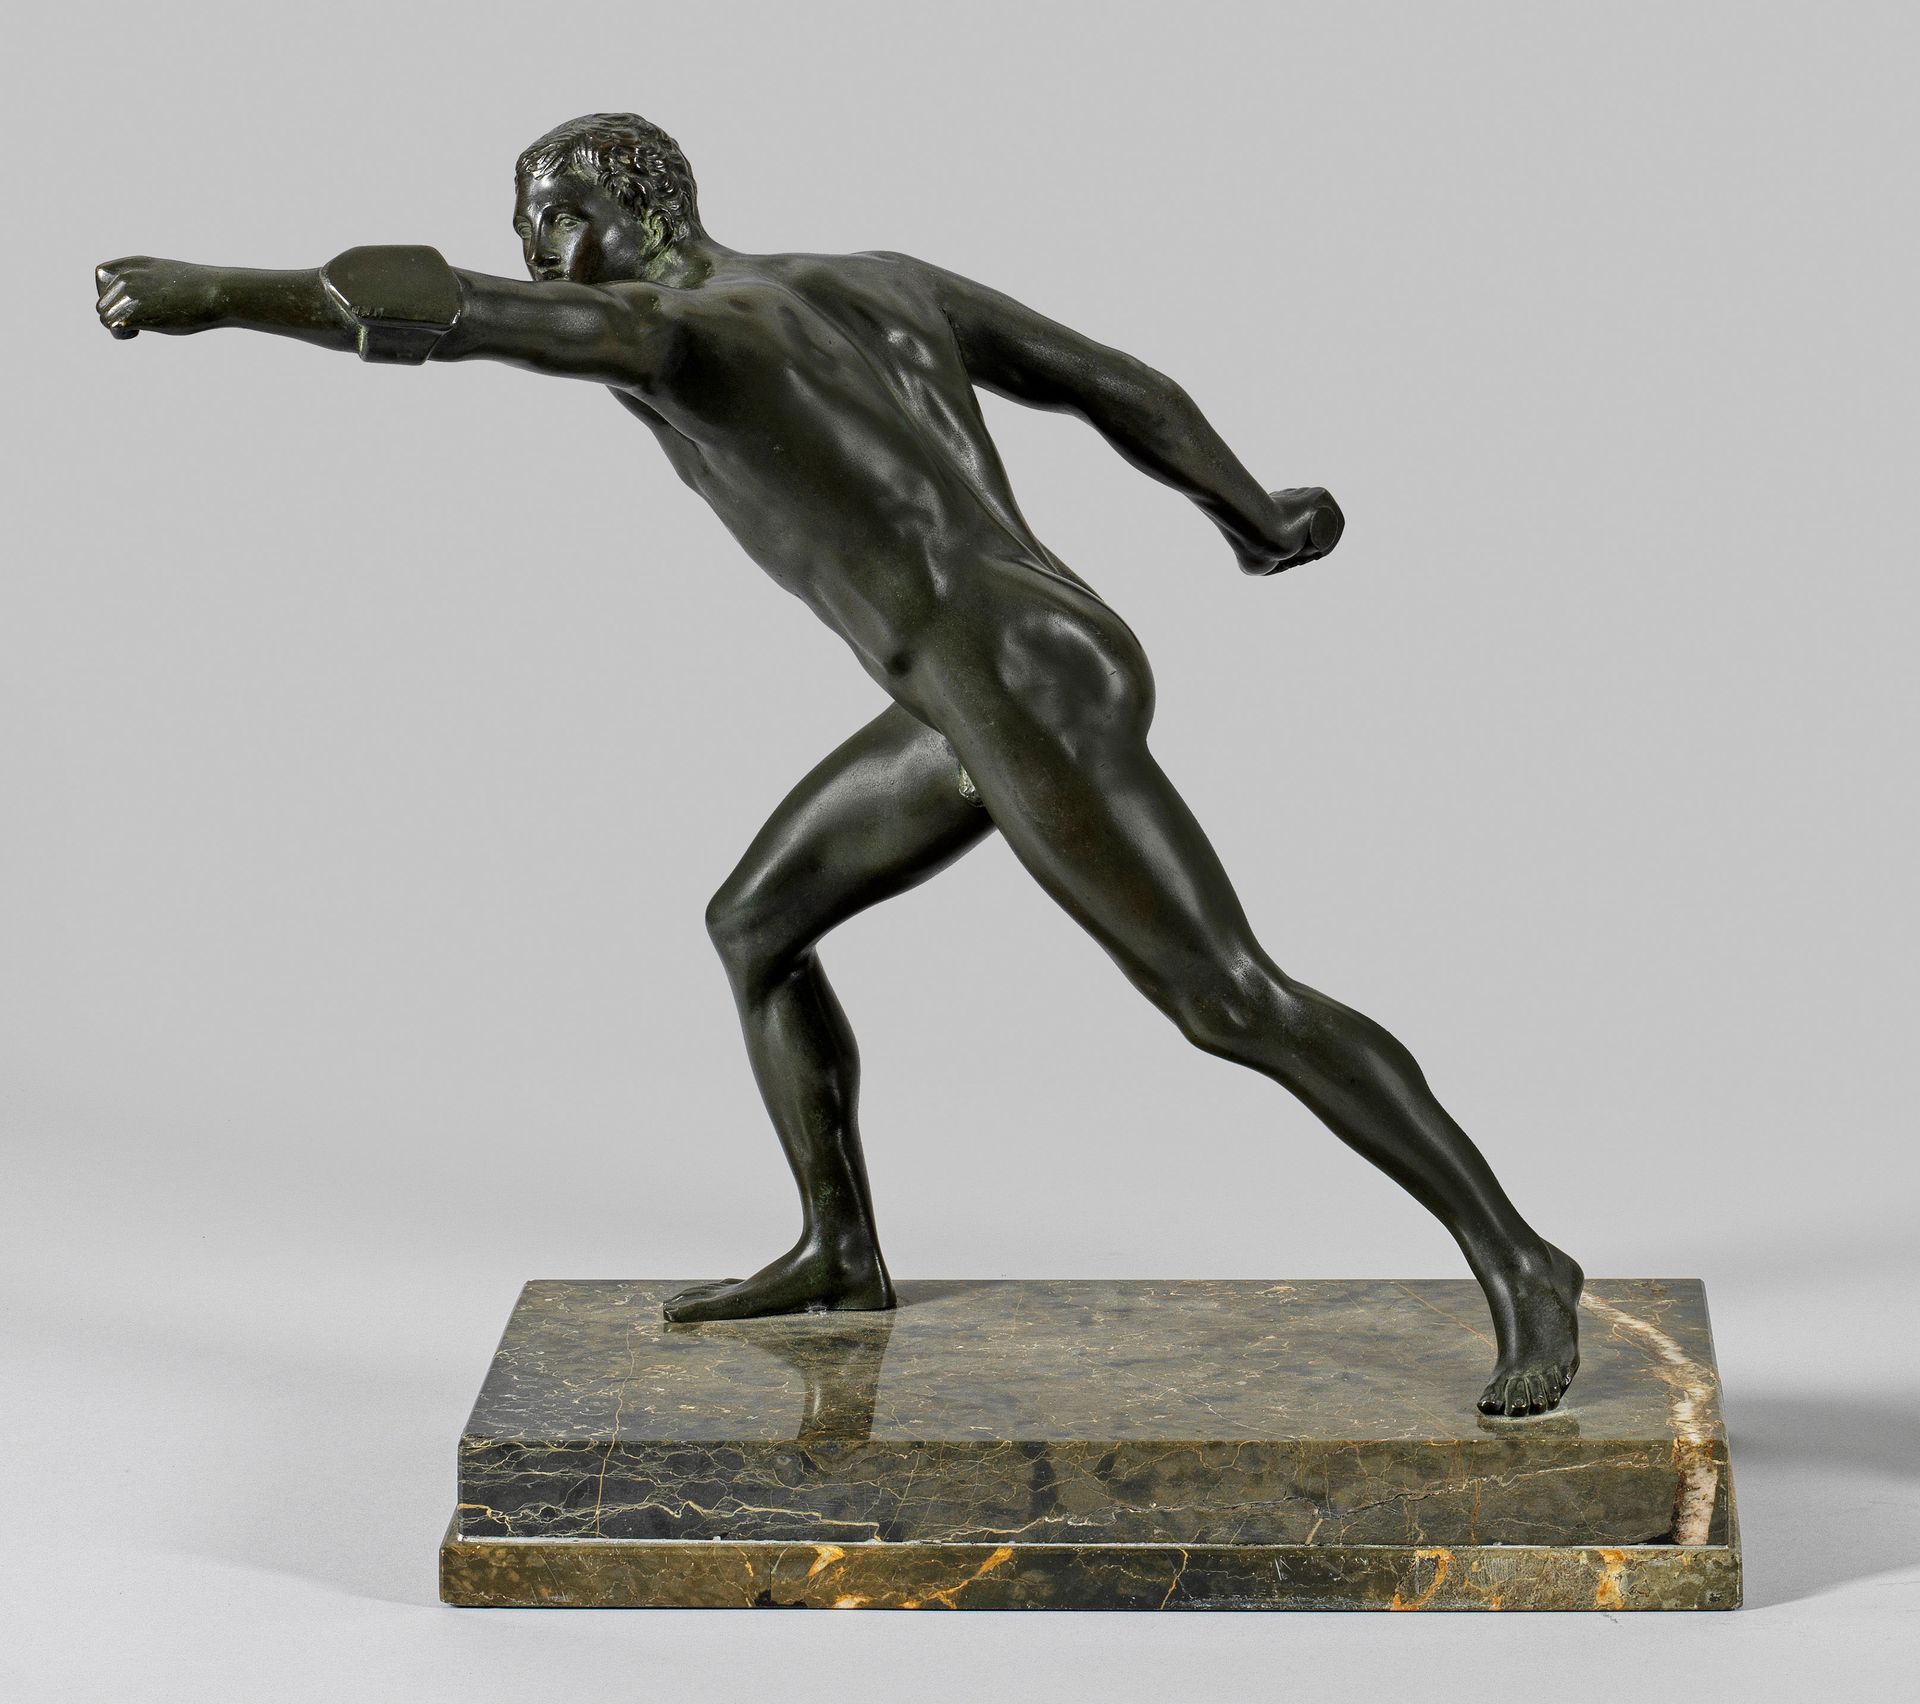 Null French or Italian sculptor (active in the 19th century)
"Borghese Fencer" (&hellip;